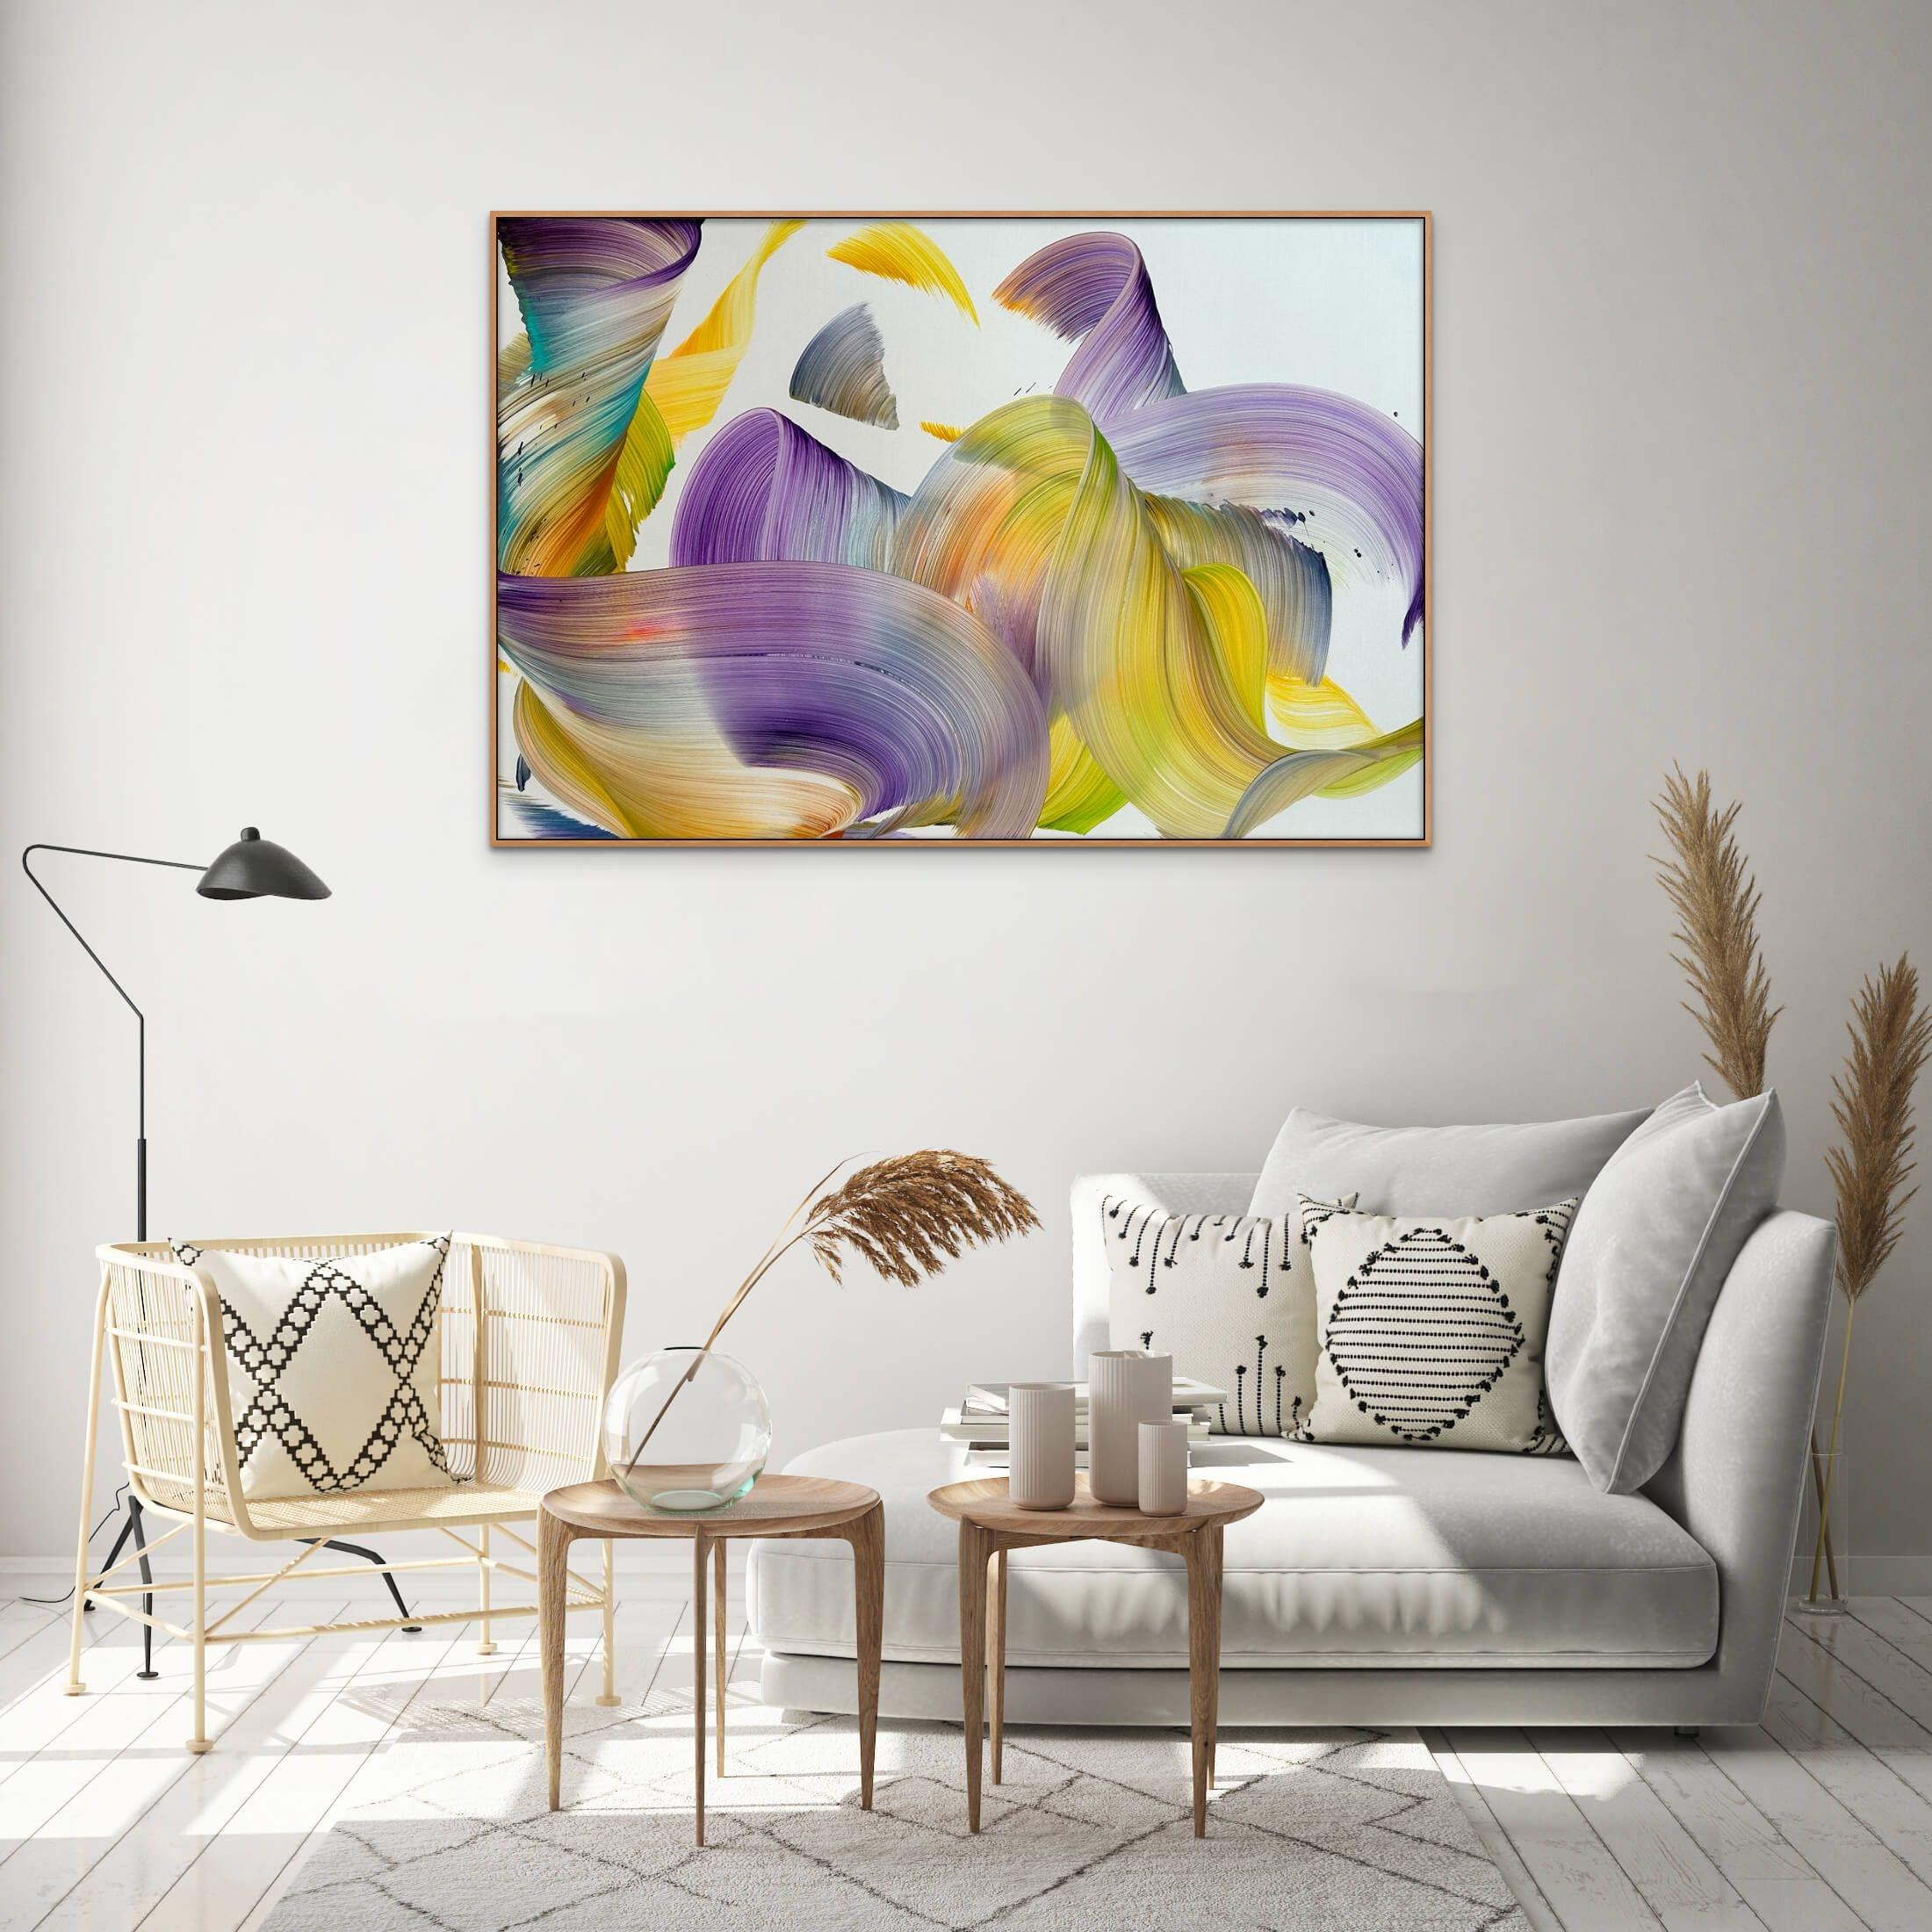 When I look into your eyes (Abstract painting) - Beige Abstract Painting by Nikolaos Schizas